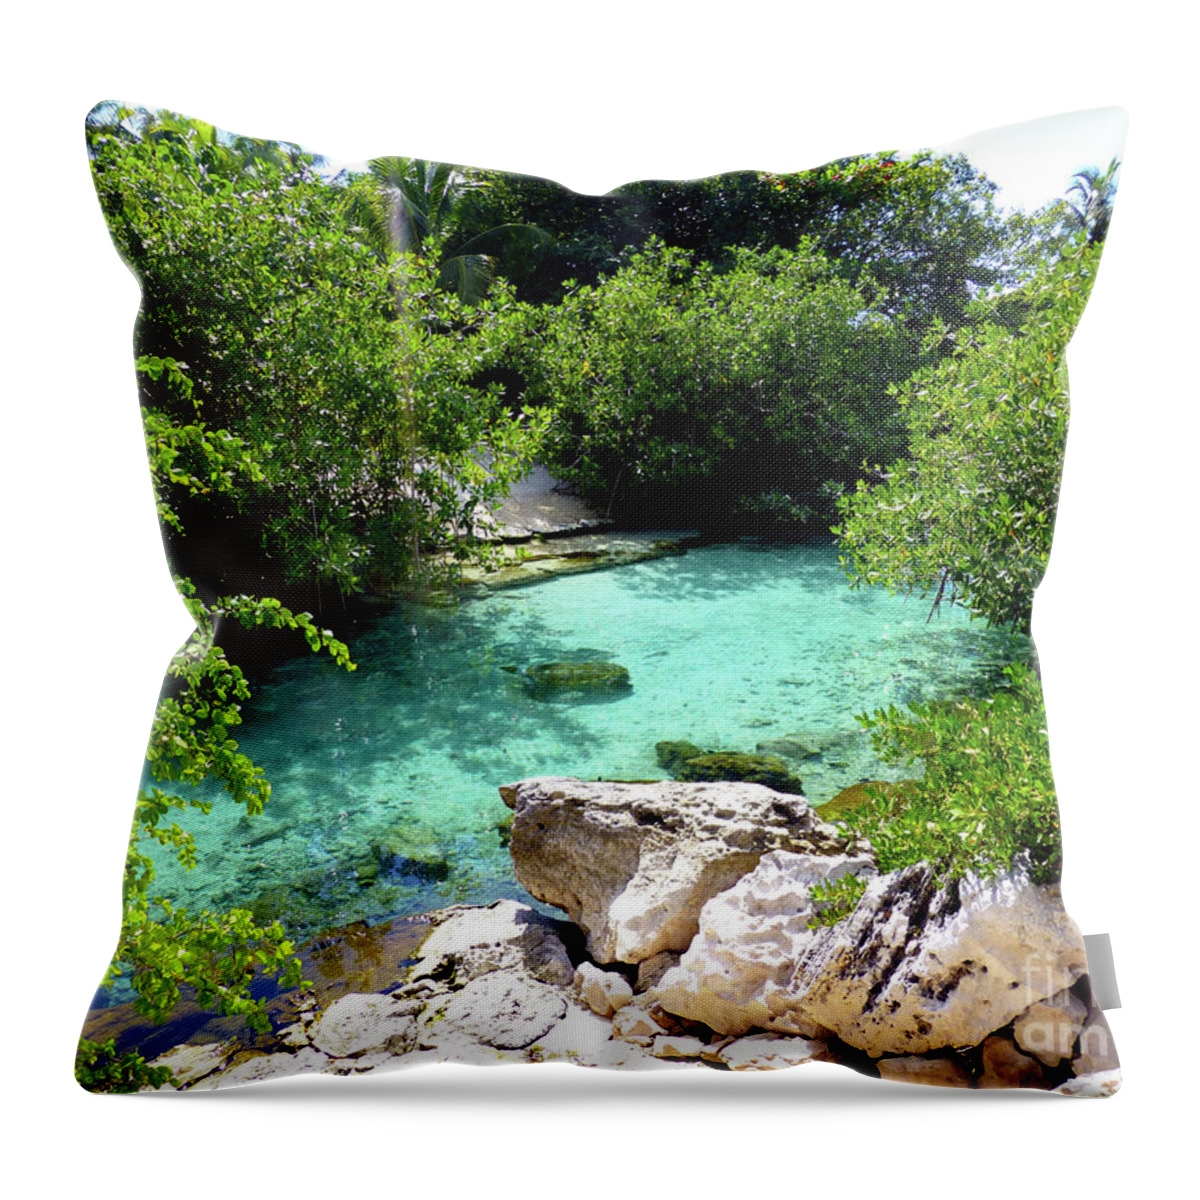 Shallow Water Throw Pillow featuring the photograph Water shallows by Francesca Mackenney